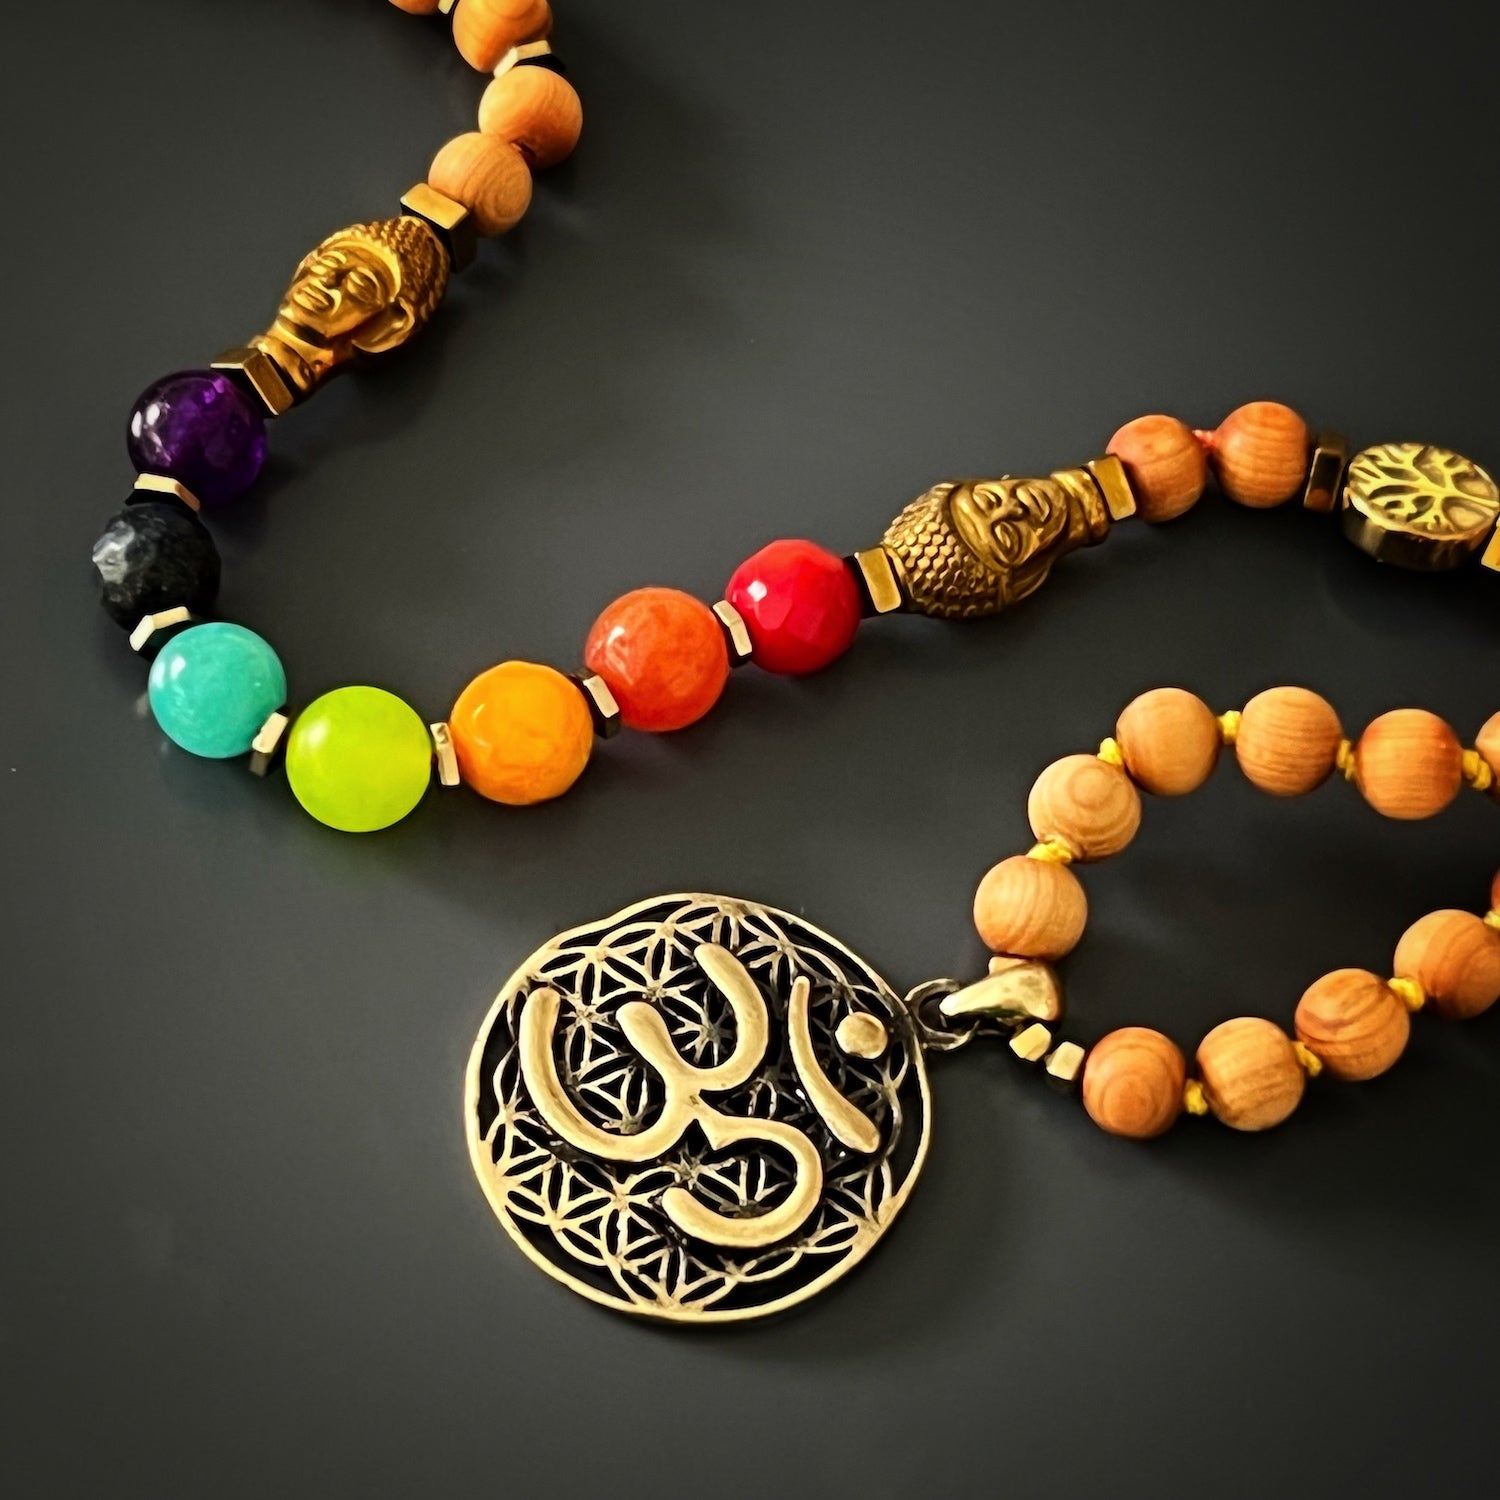 Discover the serenity of the Chakra Yoga Mala Necklace, handcrafted to awaken your inner peace.